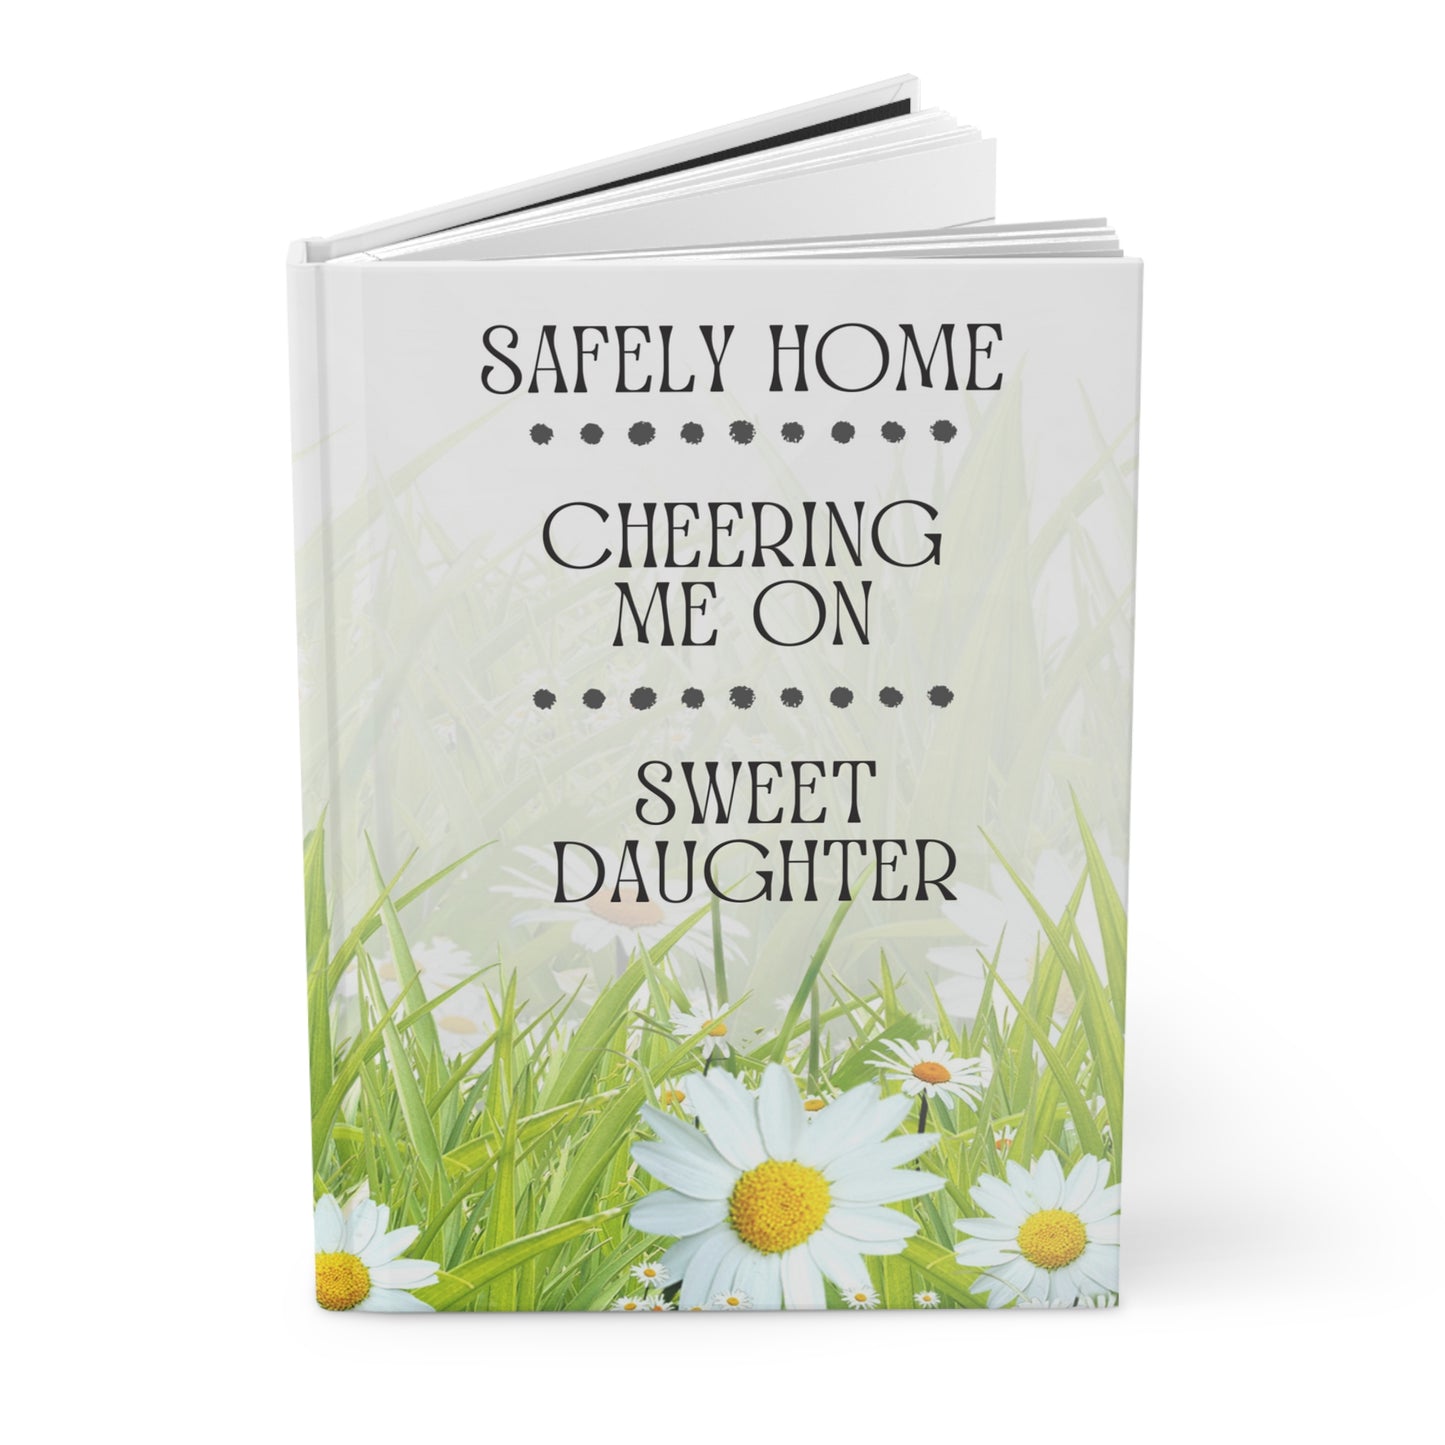 Grief Journal for Loss of Daughter, Safely Home Cheering Me On